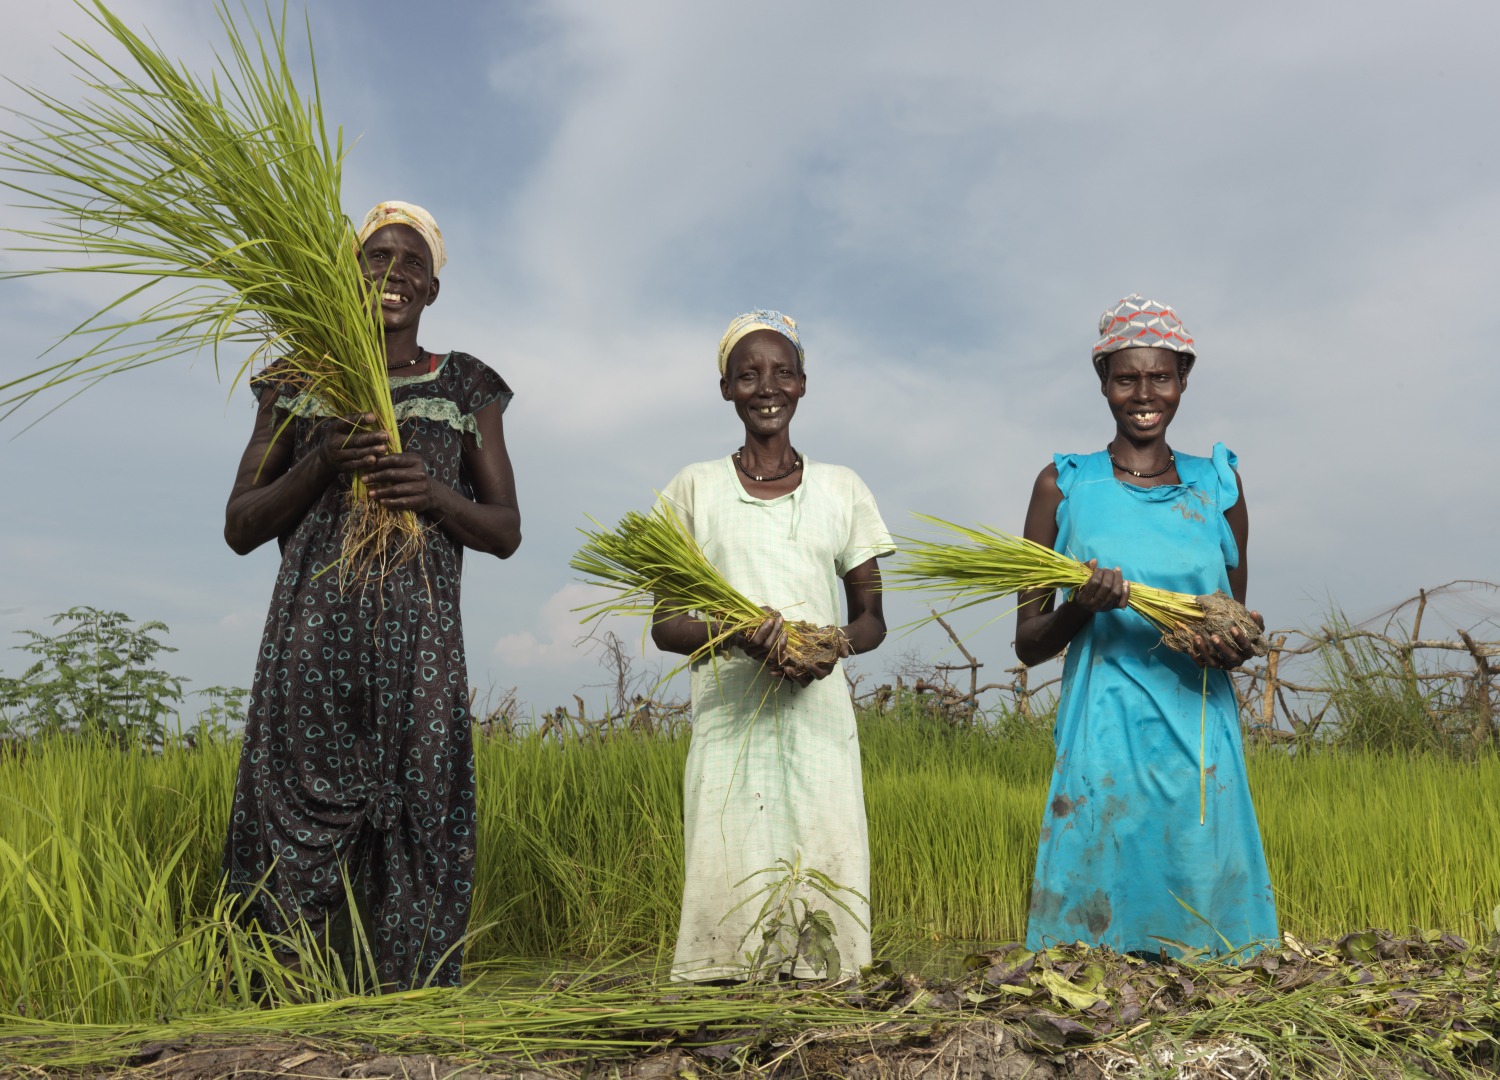 (from left to right) Nyathor Dor, Nyamai Duoth, and Nyayiela Nyuon take rice from the nursery to be replanted in the paddy.